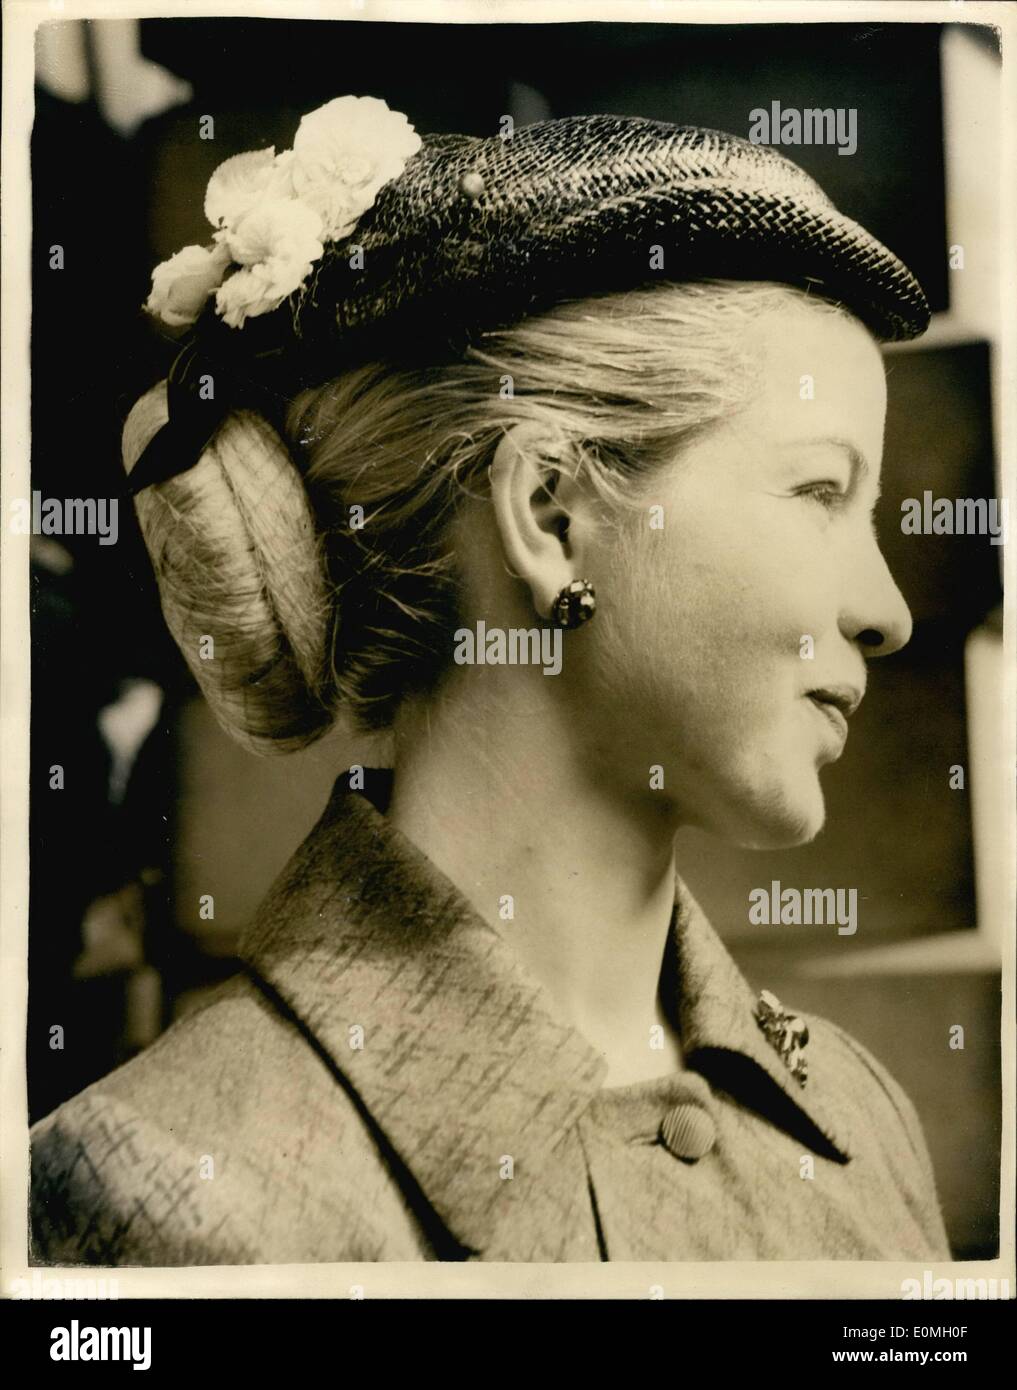 Apr. 04, 1955 - Press View of the Royal Academy Exhibition... Mrs. Kendall Brook from South Africa. Keystone Photo Shows: Mrs. Kendall Brooke from Cape Town, South Africa - wears a black straw hat - trimmed with yellow flowers, she arrived for the Press View of the Royal Academy Exhibition at Burlington House this morning. Stock Photo